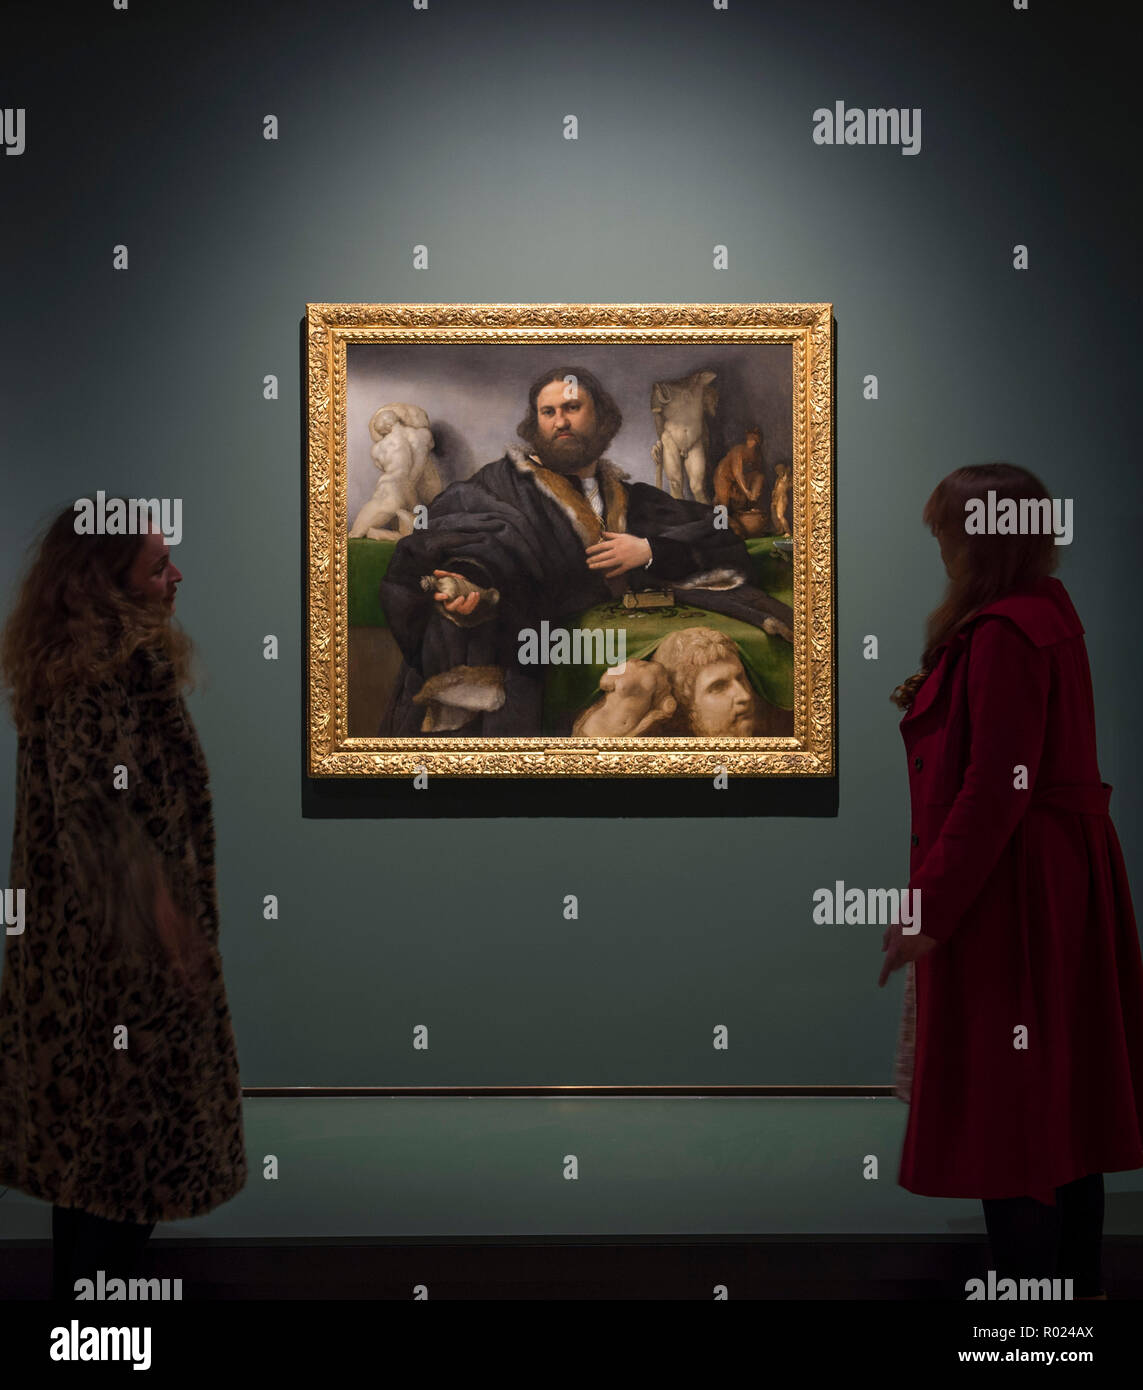 National Gallery, London, UK. 1 November, 2018. Born in Venice and of the Venetian School, the Renaissance portrait painter Lorenzo Lotto travelled extensively and worked in different parts of Italy, most notably Treviso, Bergamo, Venice, and the Italian Marches. The exhibition runs from 5 Nov 2018 - 10 Feb 2019. Image: Andrea Odoni, 1527. Lent by Her Majesty The Queen. Royal Collection Trust. Credit: Malcolm Park/Alamy Live News. Stock Photo